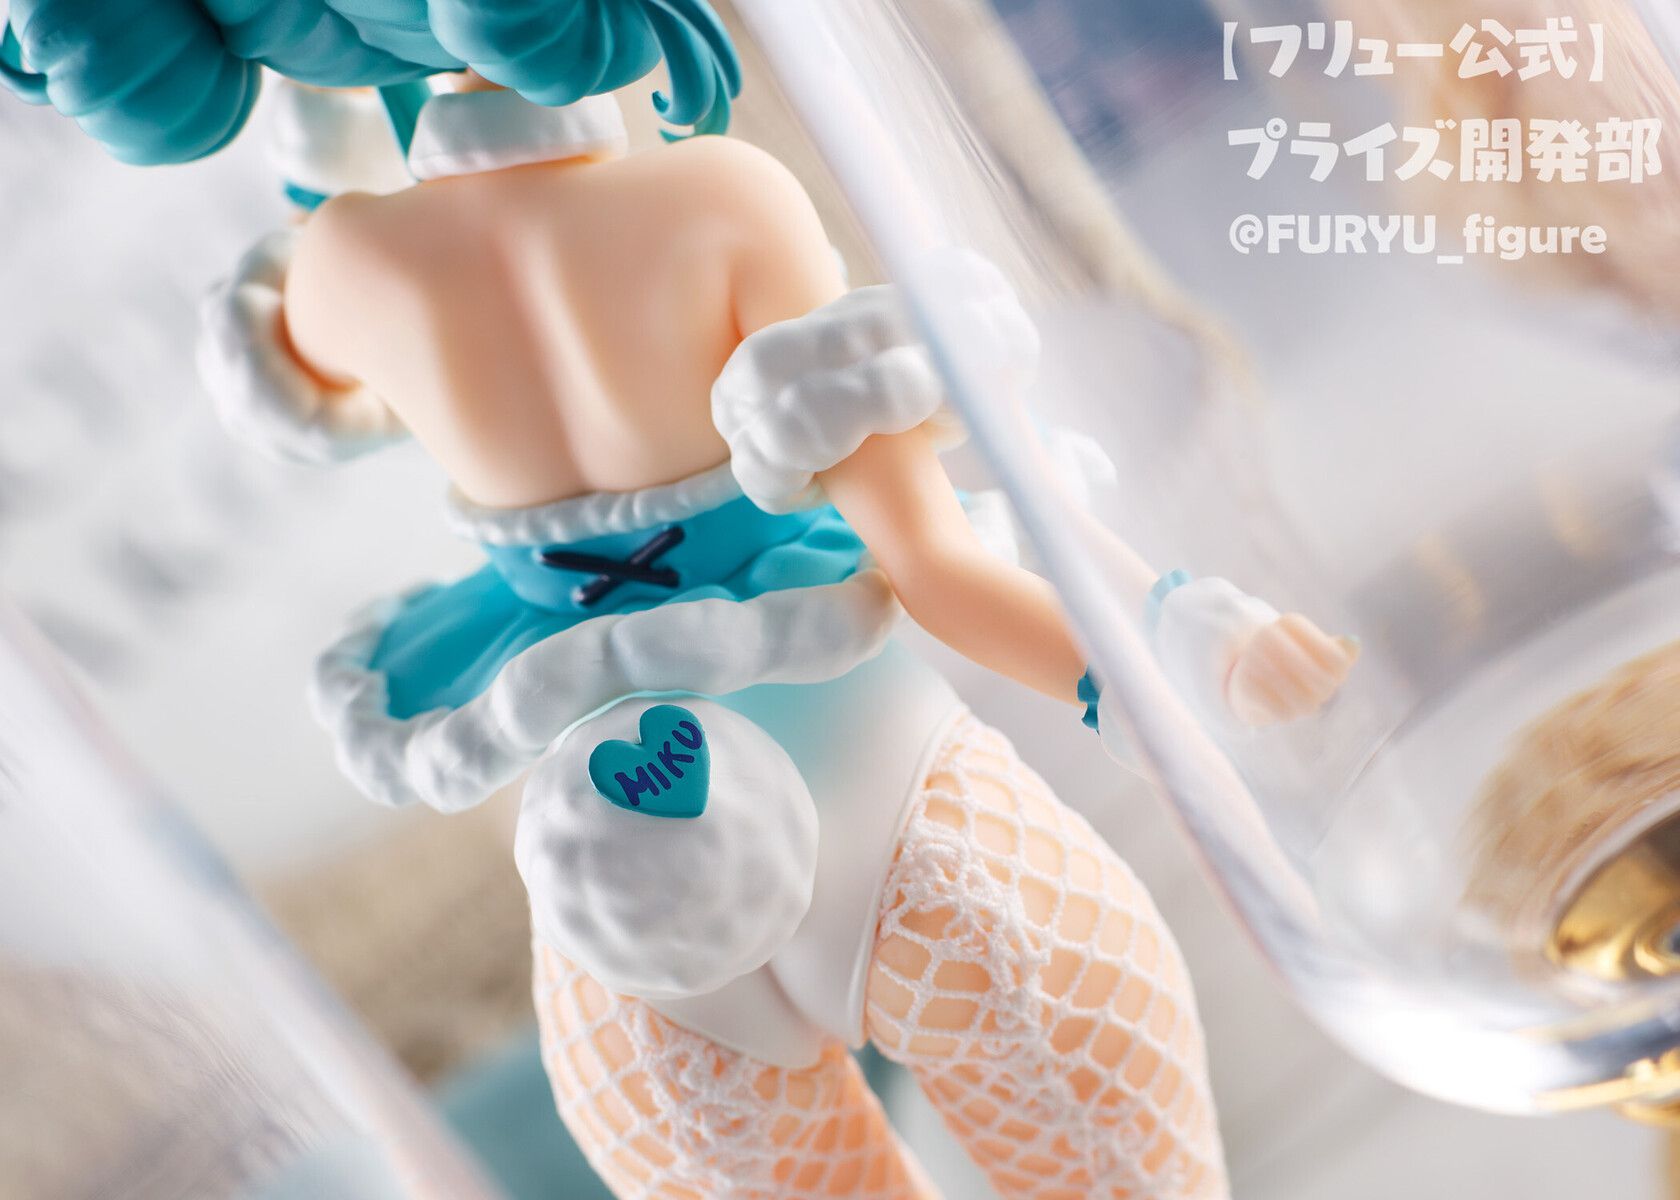 [Hatsune Miku] Erotic figure of the bunny figure of the and thighs of the muchimuchi drawn by Anmi teacher! 8